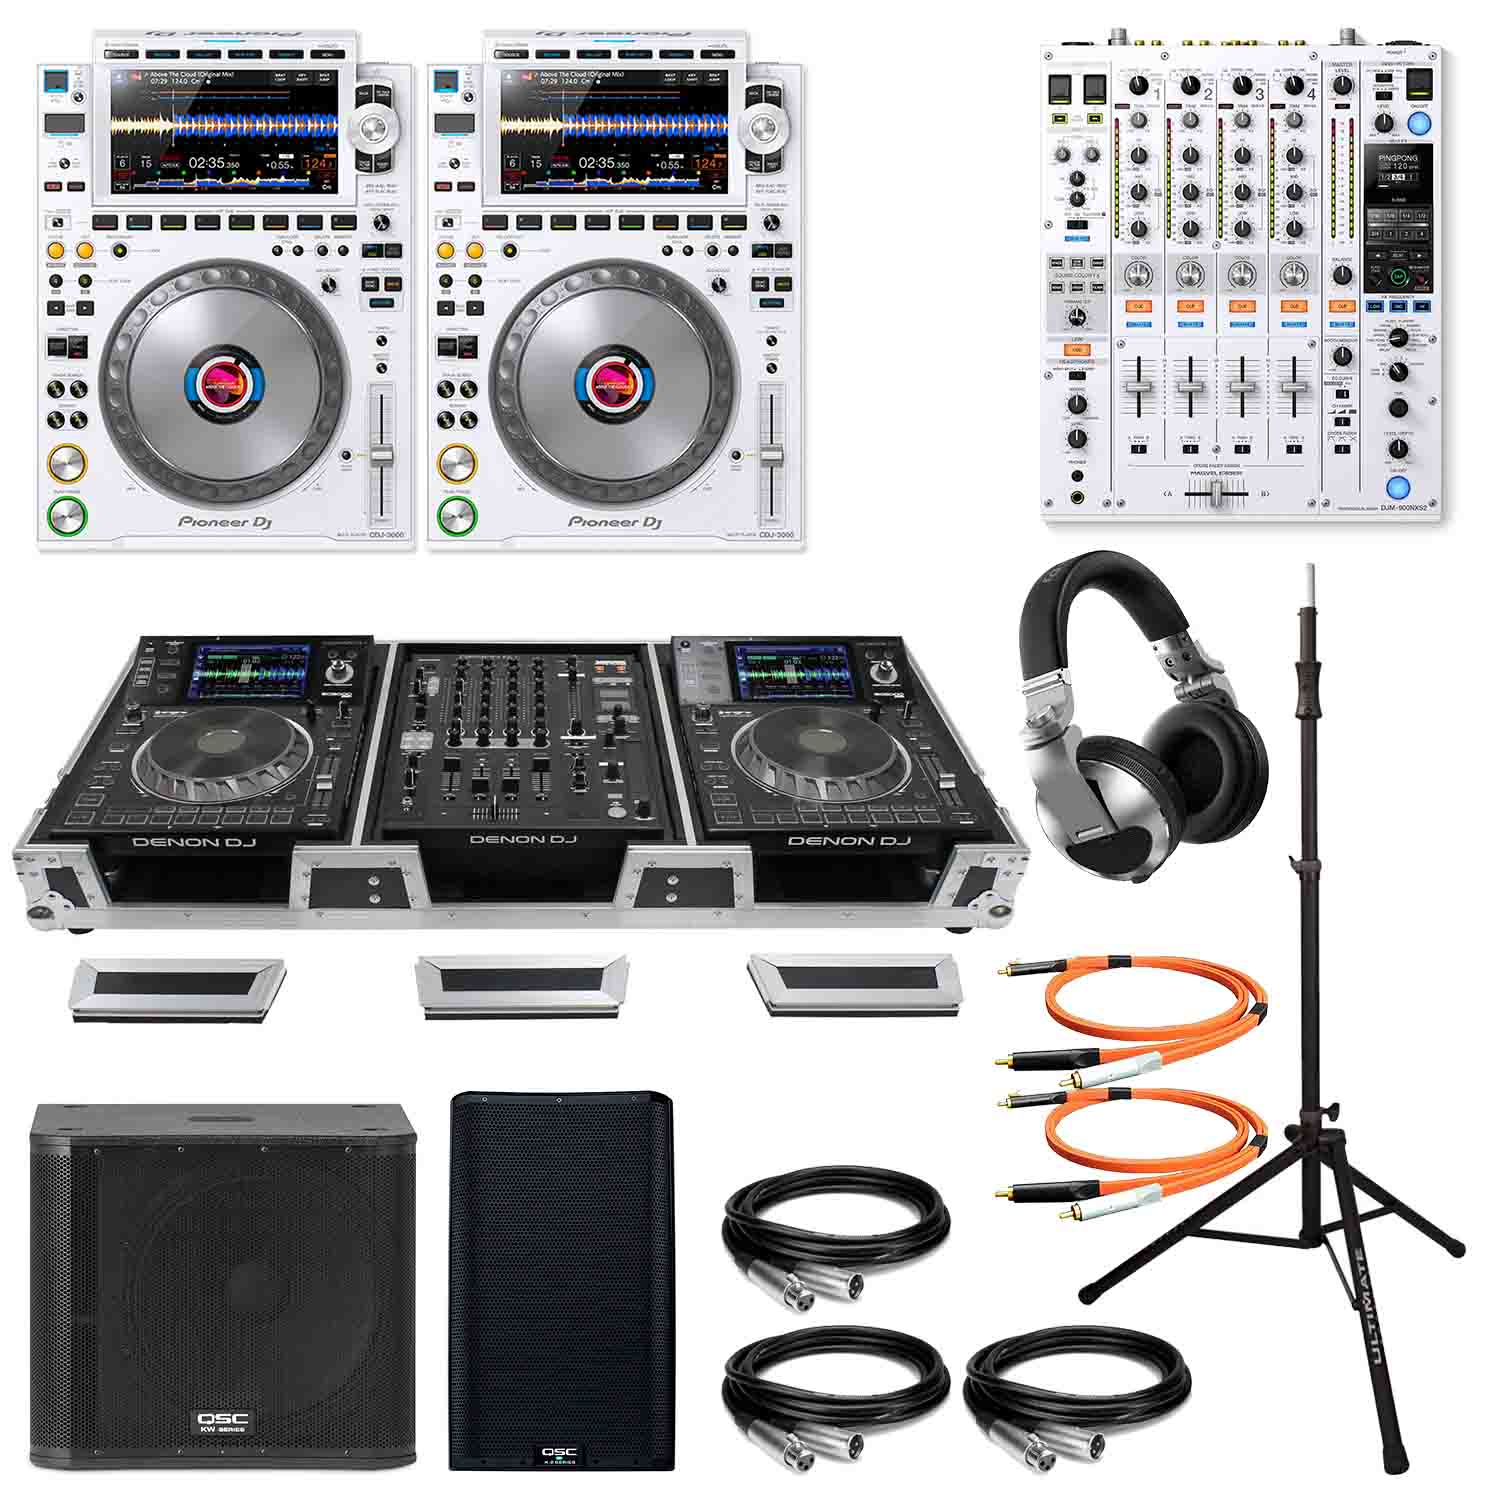 CDJ3000 Club DJ Package with DJM-900NXS2, QSC Speakers, Pro Case, Speaker Stands and Accessories - White - Hollywood DJ